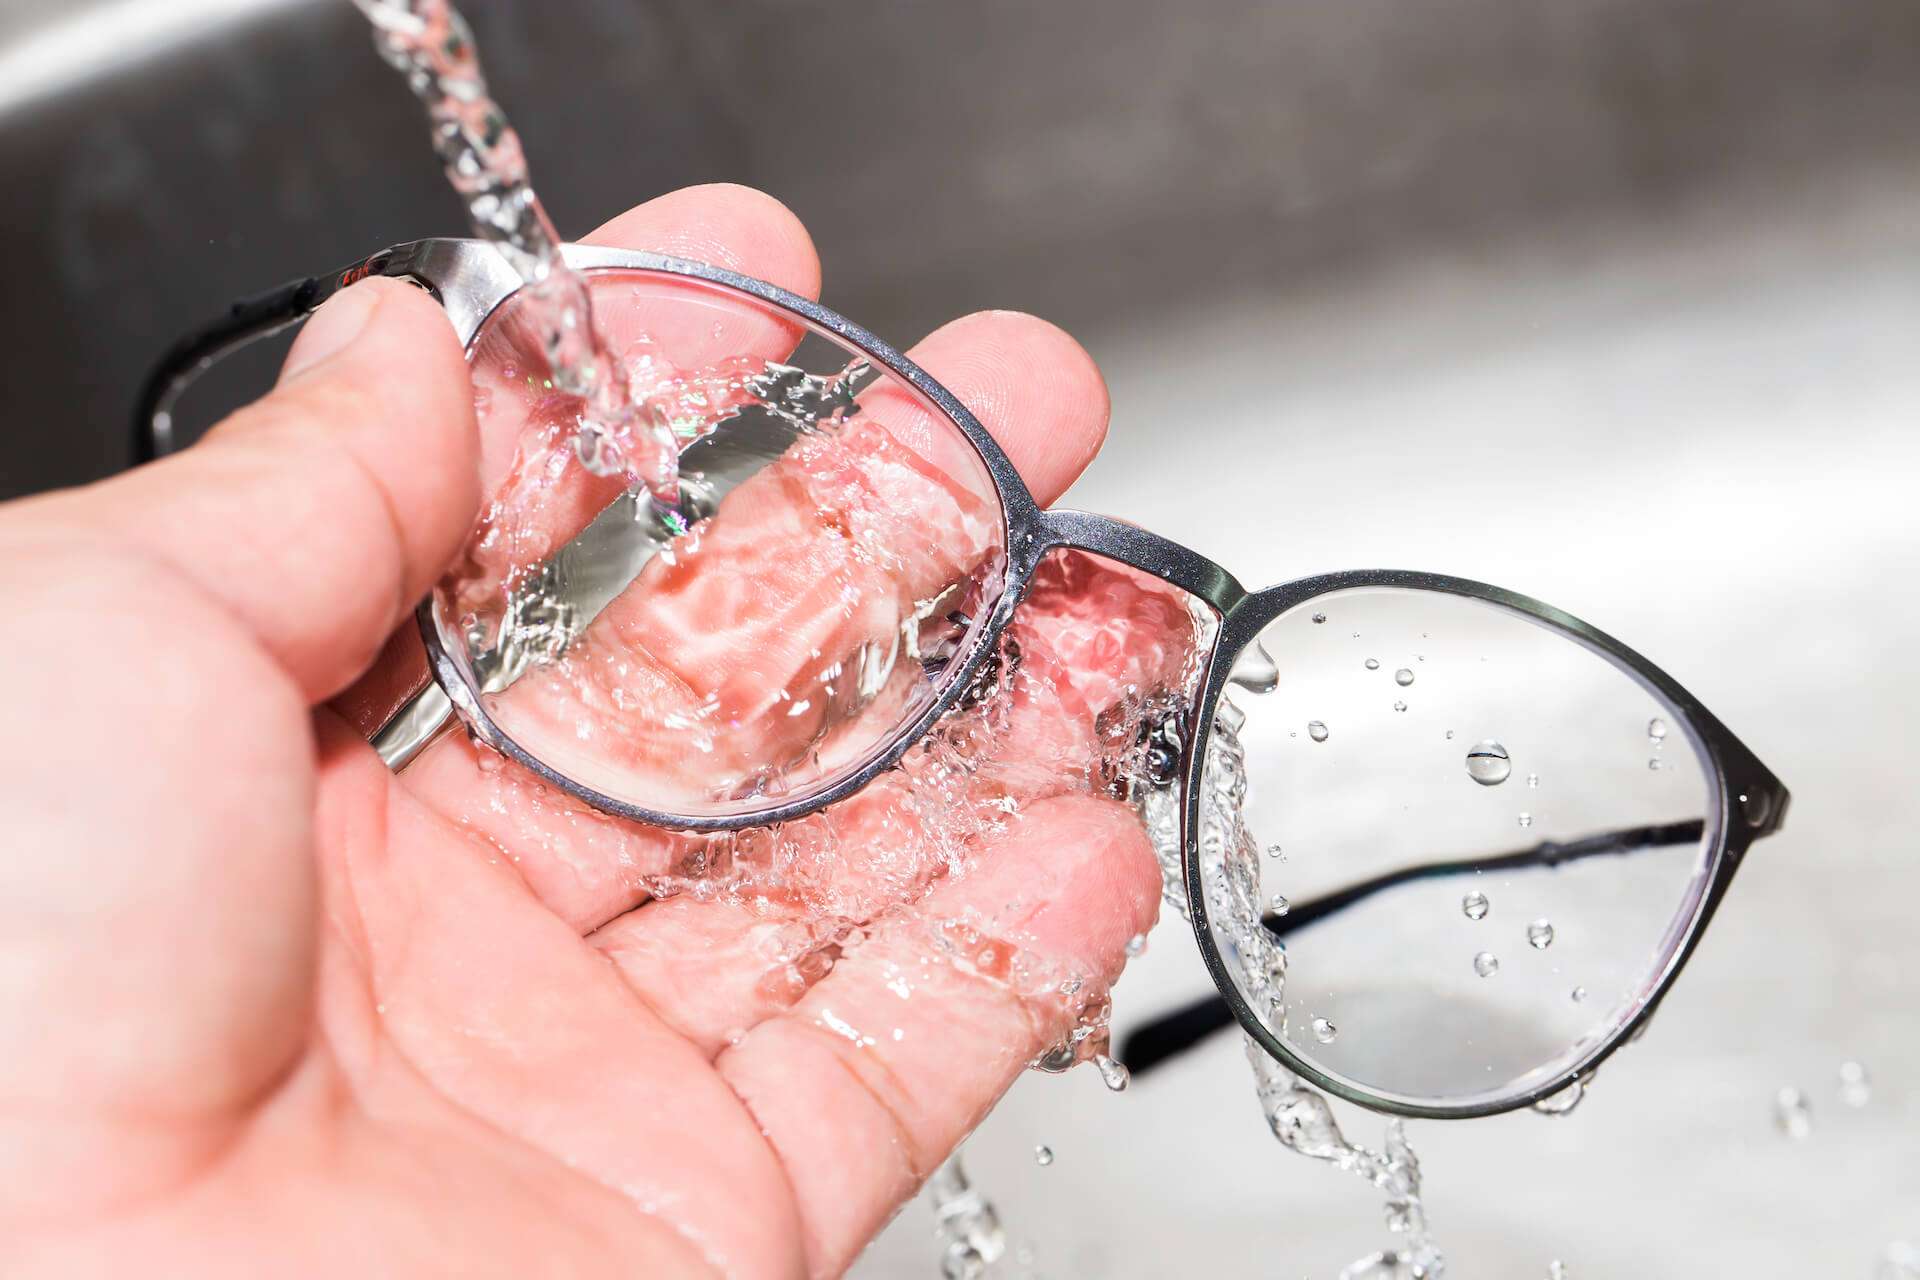 How To Clean Glasses - Prevent COVID-19 Without Damaging Eyewear